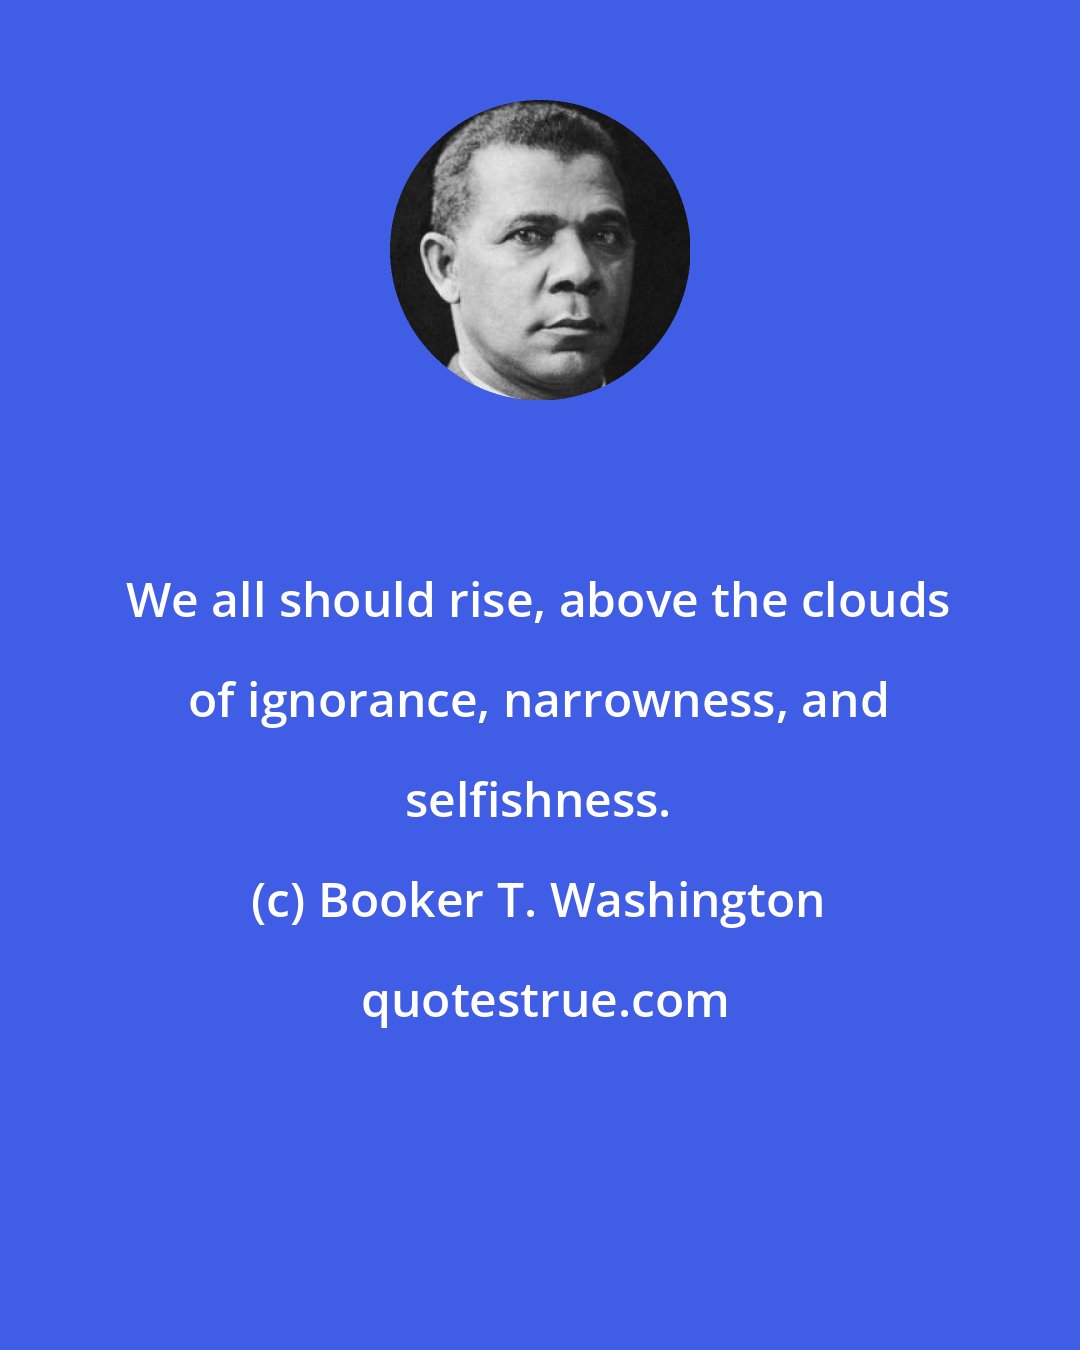 Booker T. Washington: We all should rise, above the clouds of ignorance, narrowness, and selfishness.